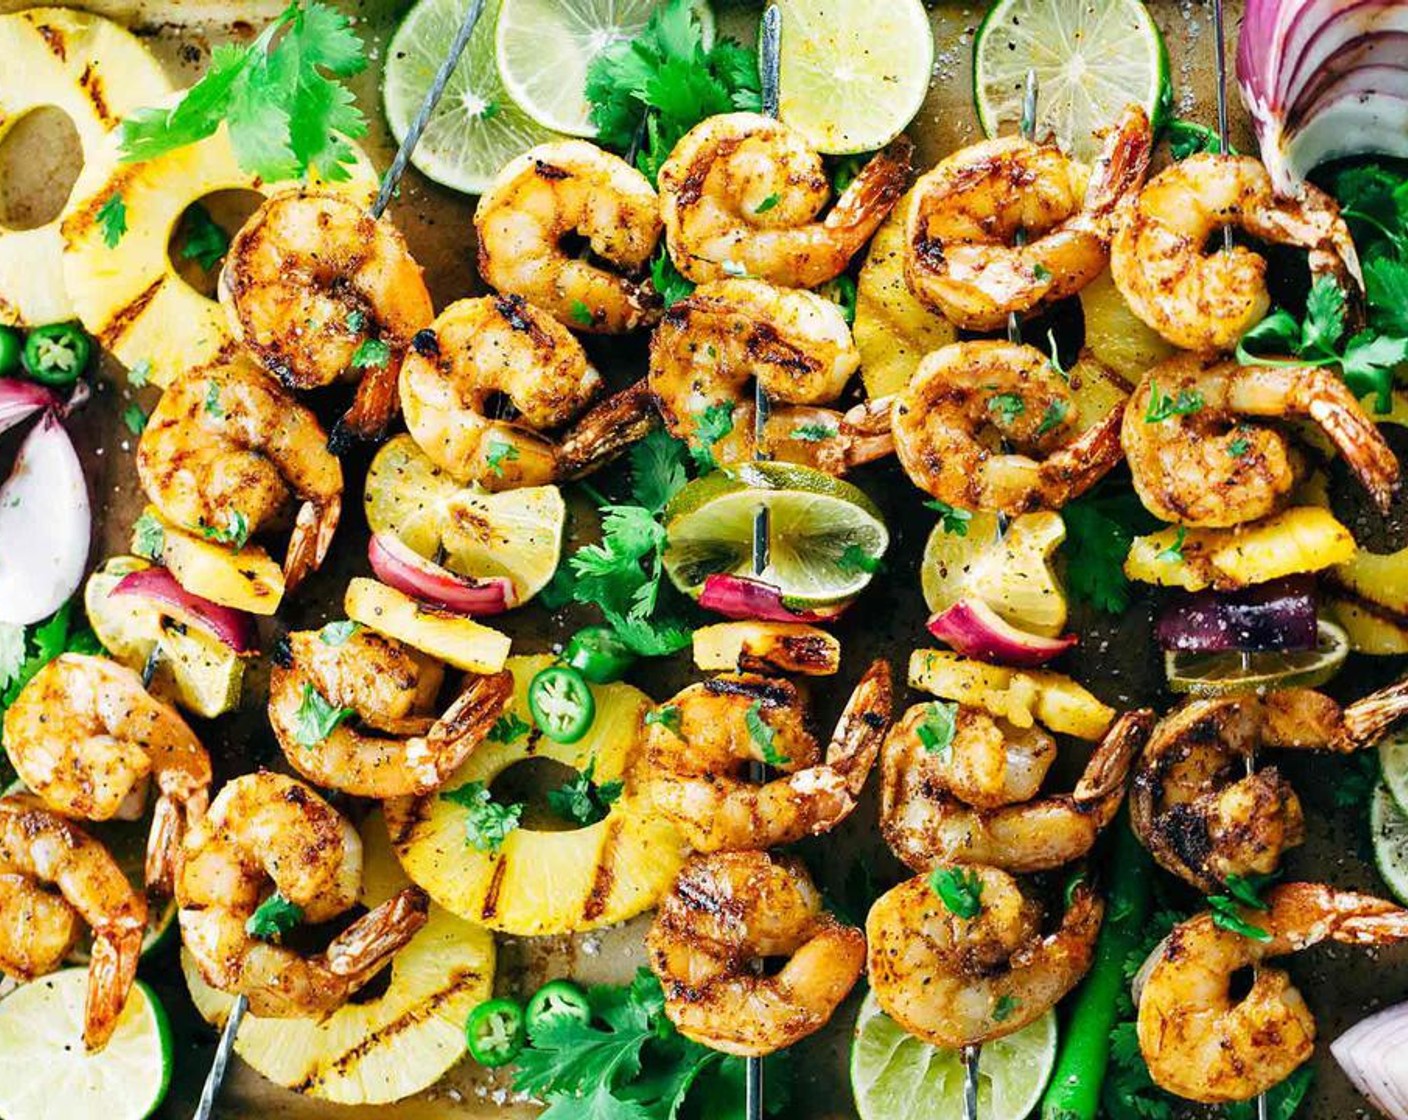 Grilled Shrimp Skewers with Pineapple Sauce